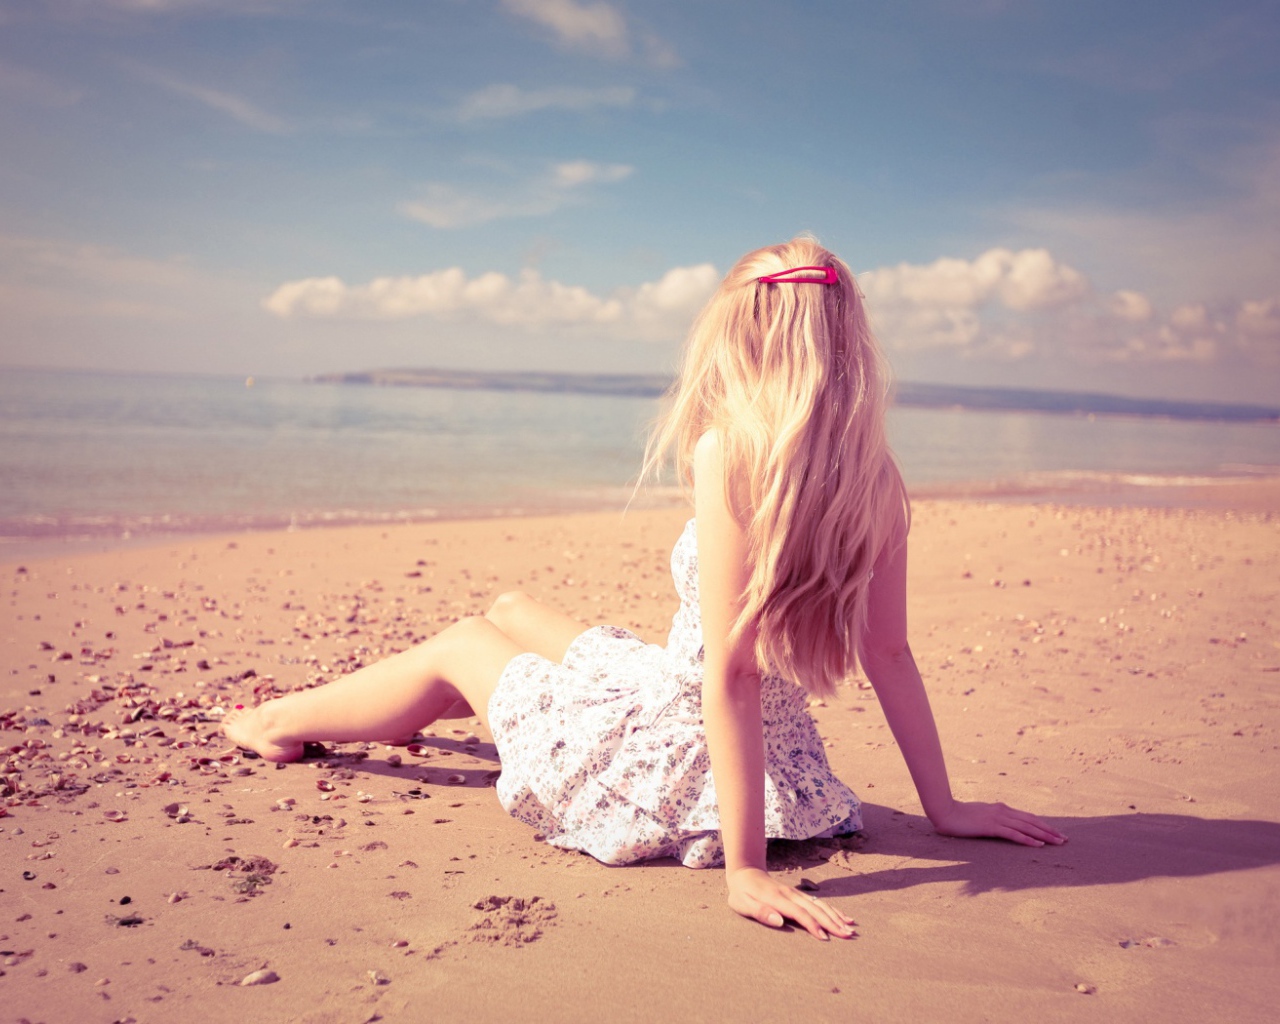 A young girl on the beach